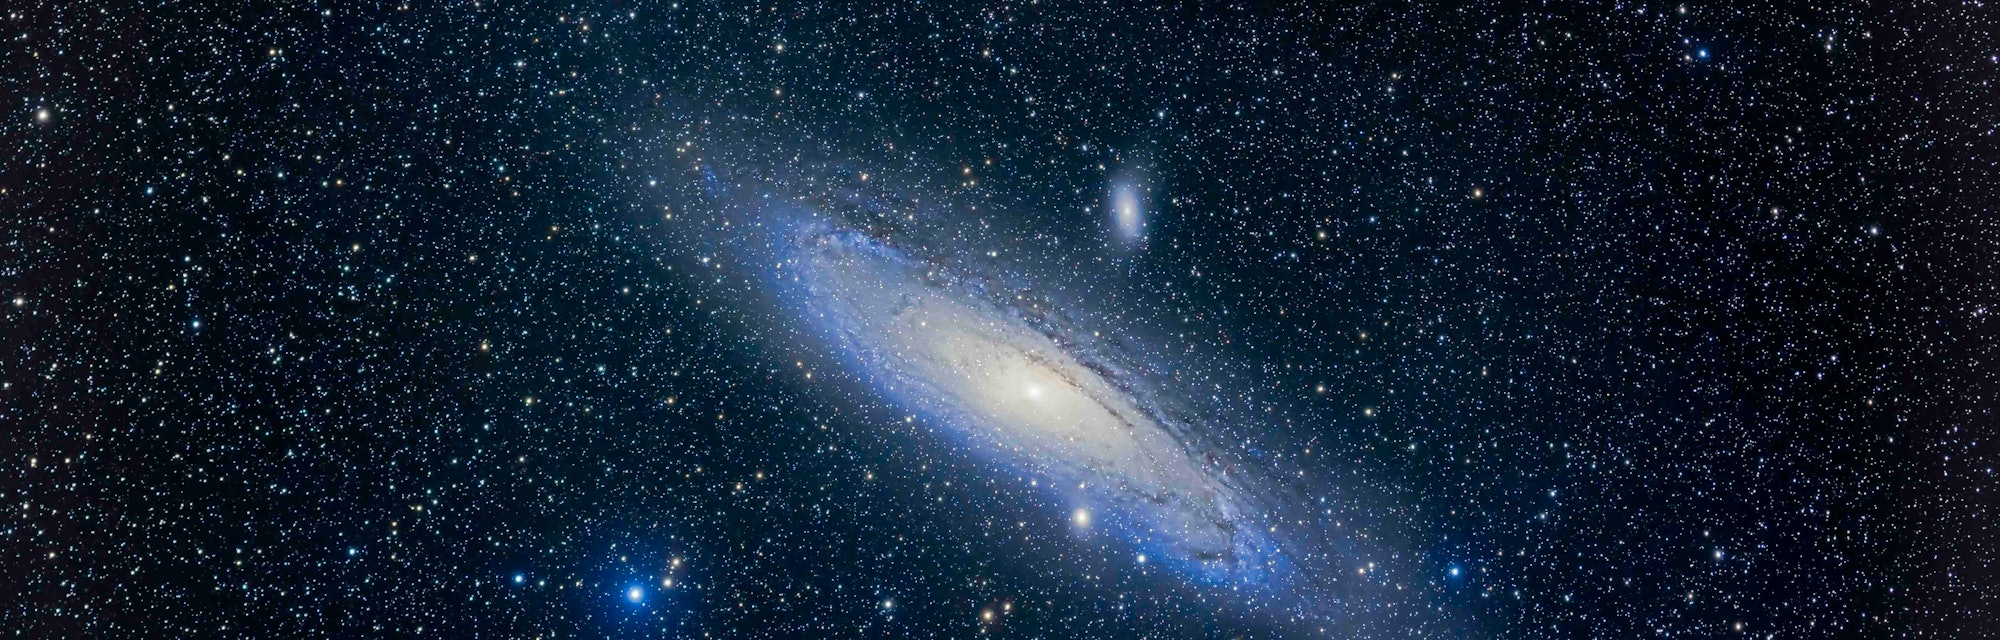 Time for my annual image of the Andromeda Galaxy! This is M31, the spiral galaxy in Andromeda, with ...